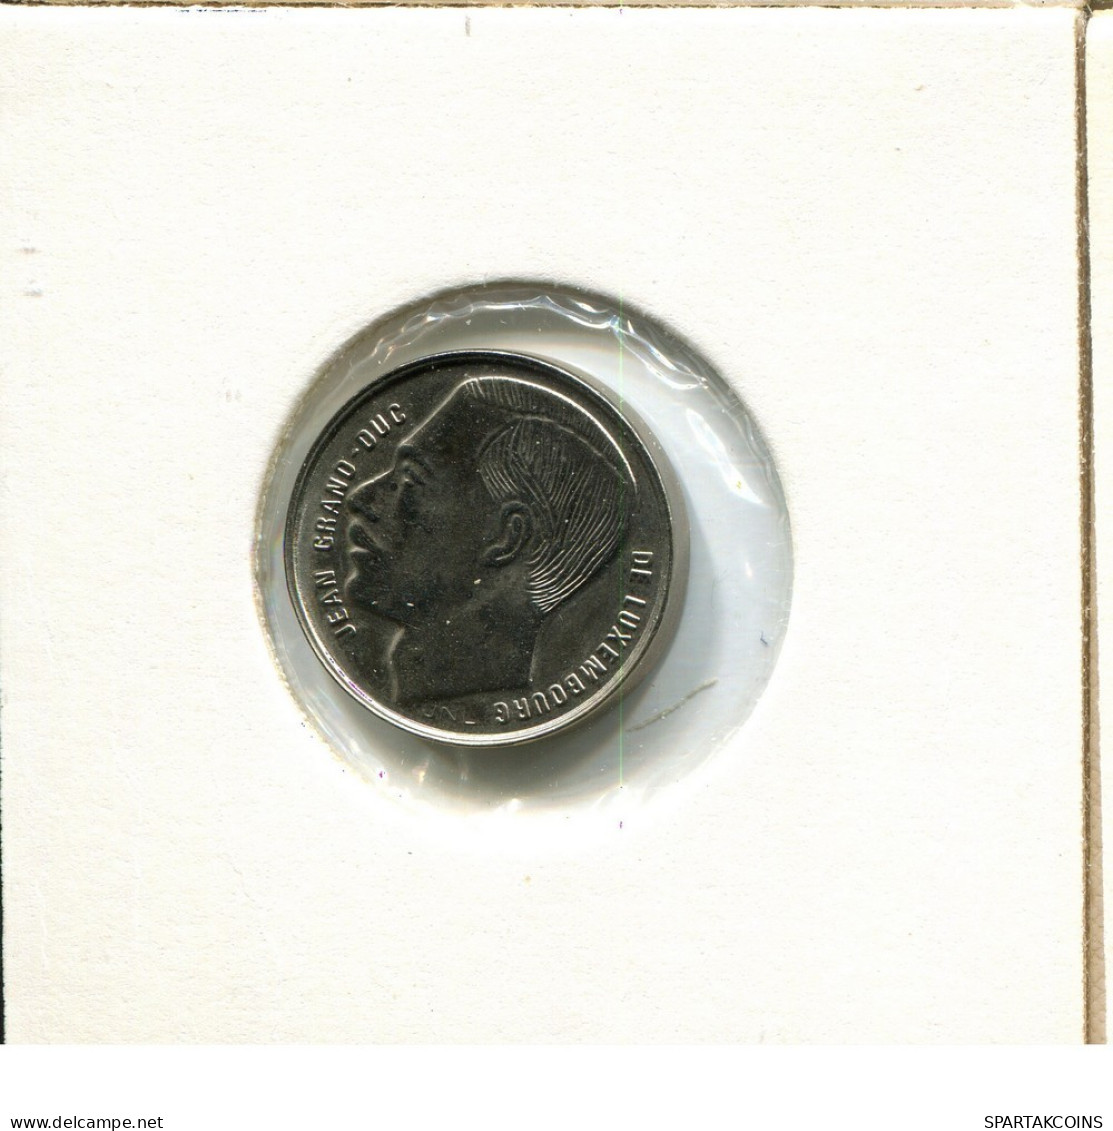 1 FRANC 1990 LUXEMBURG LUXEMBOURG Münze #AU964.D.A - Luxembourg